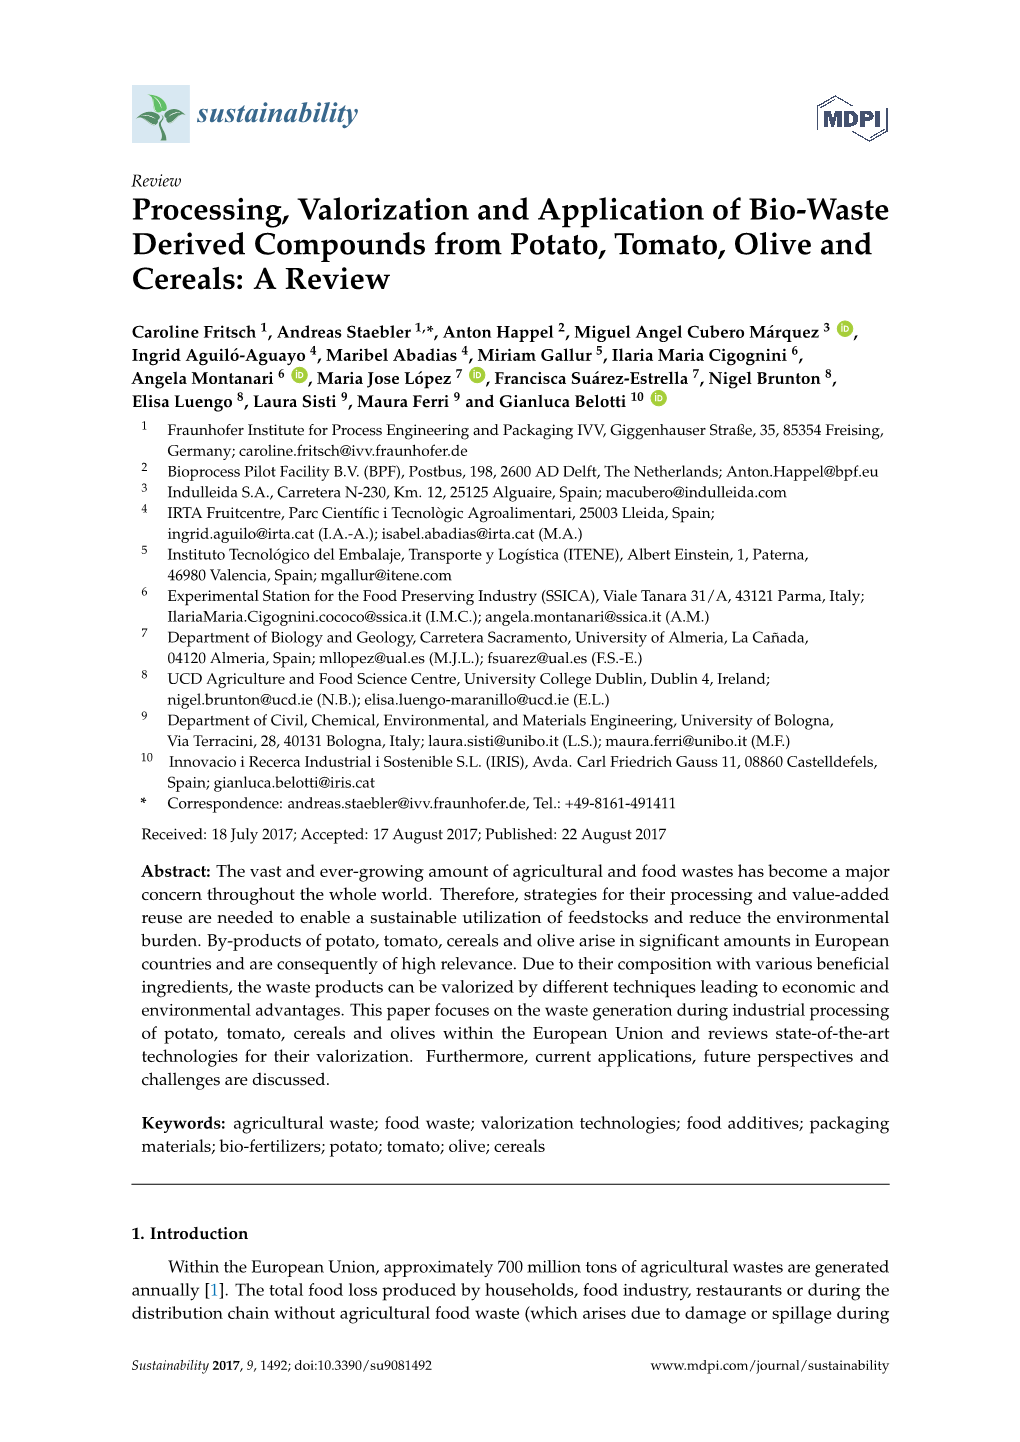 Processing, Valorization and Application of Bio-Waste Derived Compounds from Potato, Tomato, Olive and Cereals: a Review